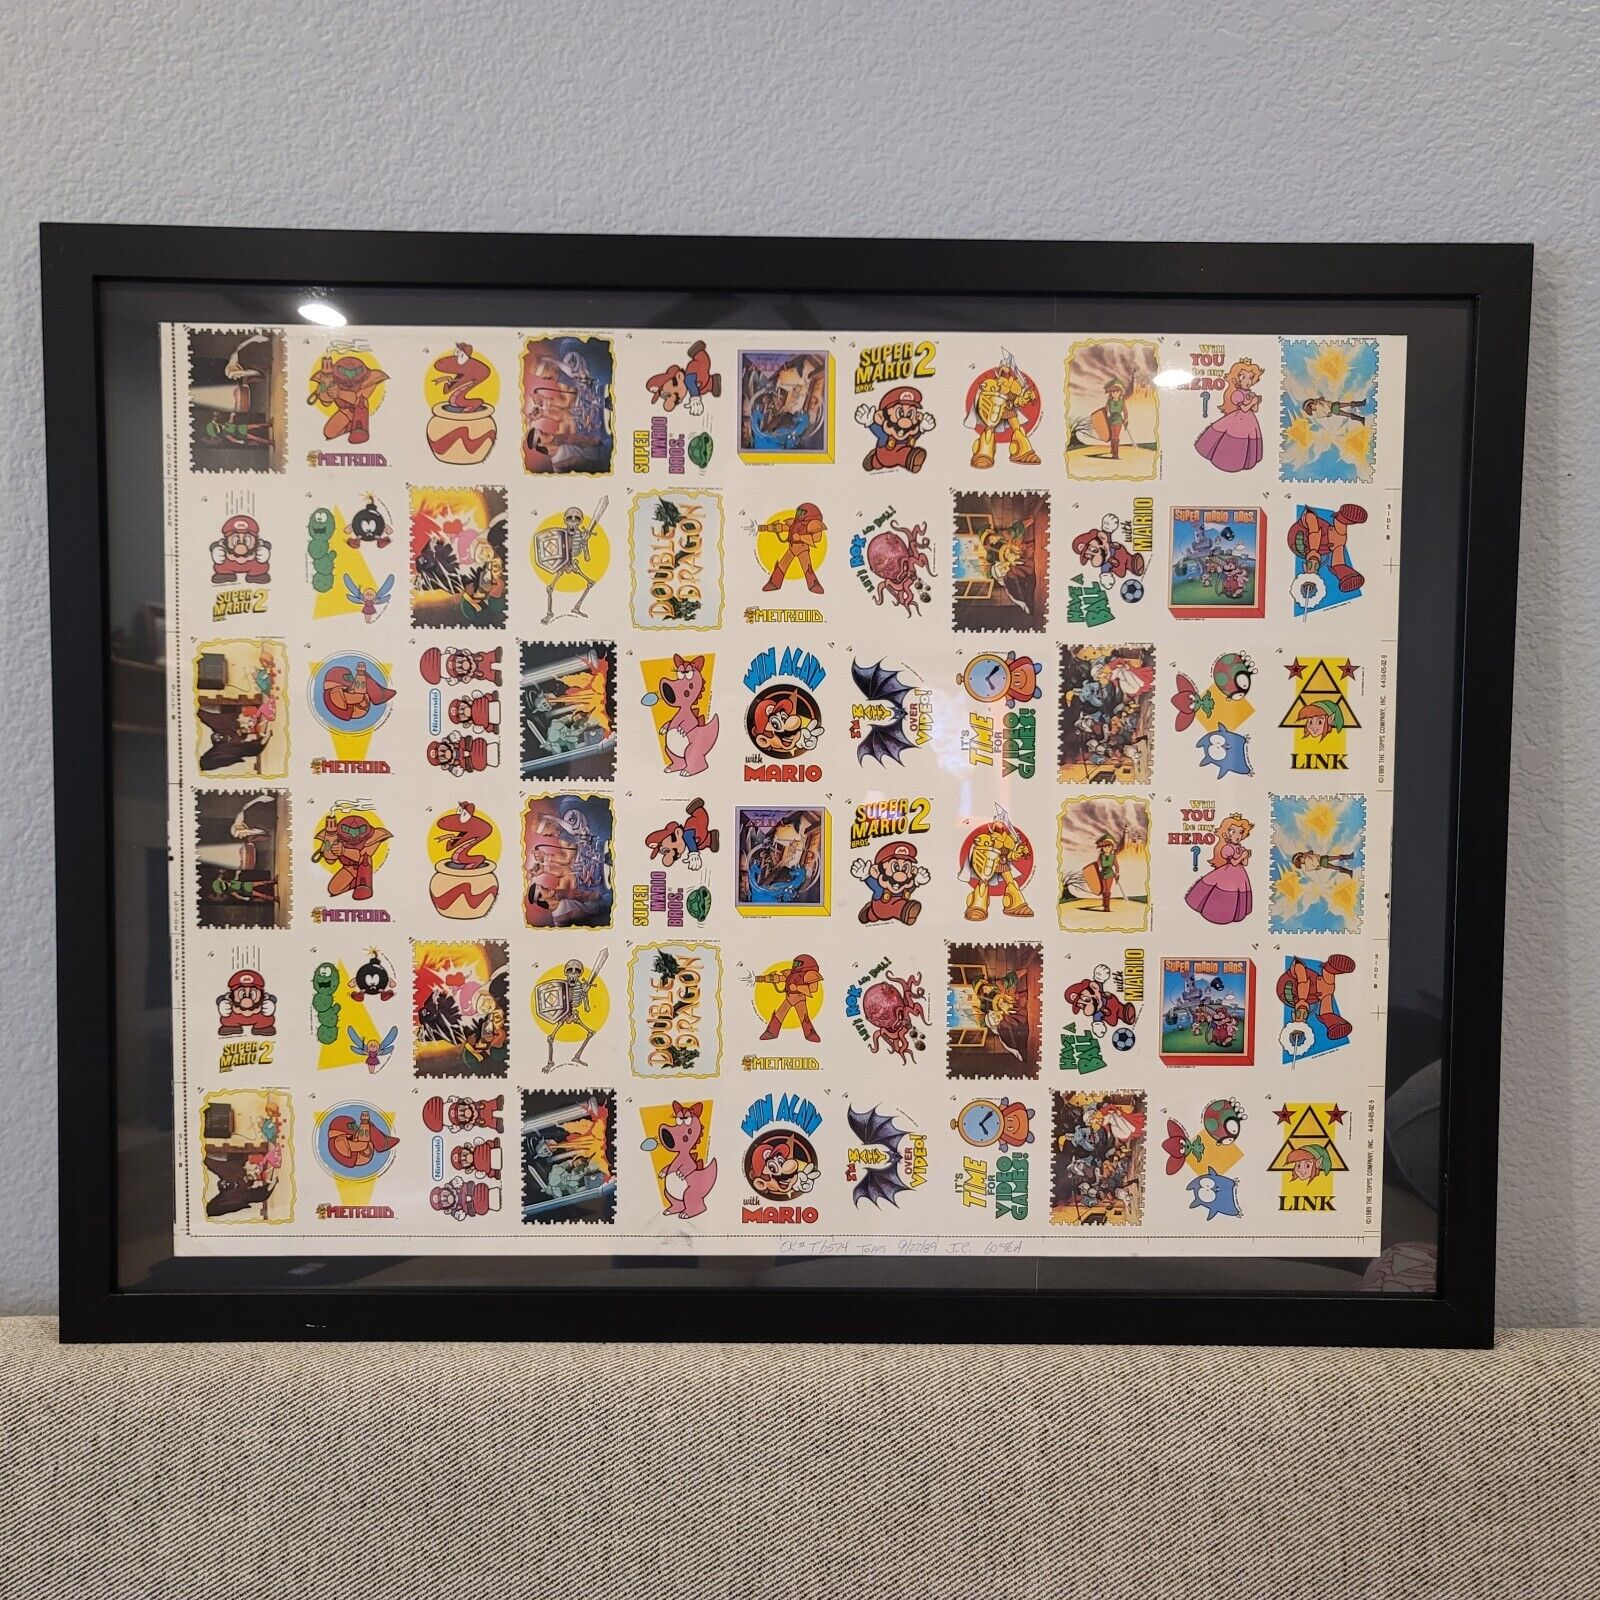 1989 Nintendo Topps UNRELEASED Series 2 UNCUT SHEET With All Series 1 & 2 Sets